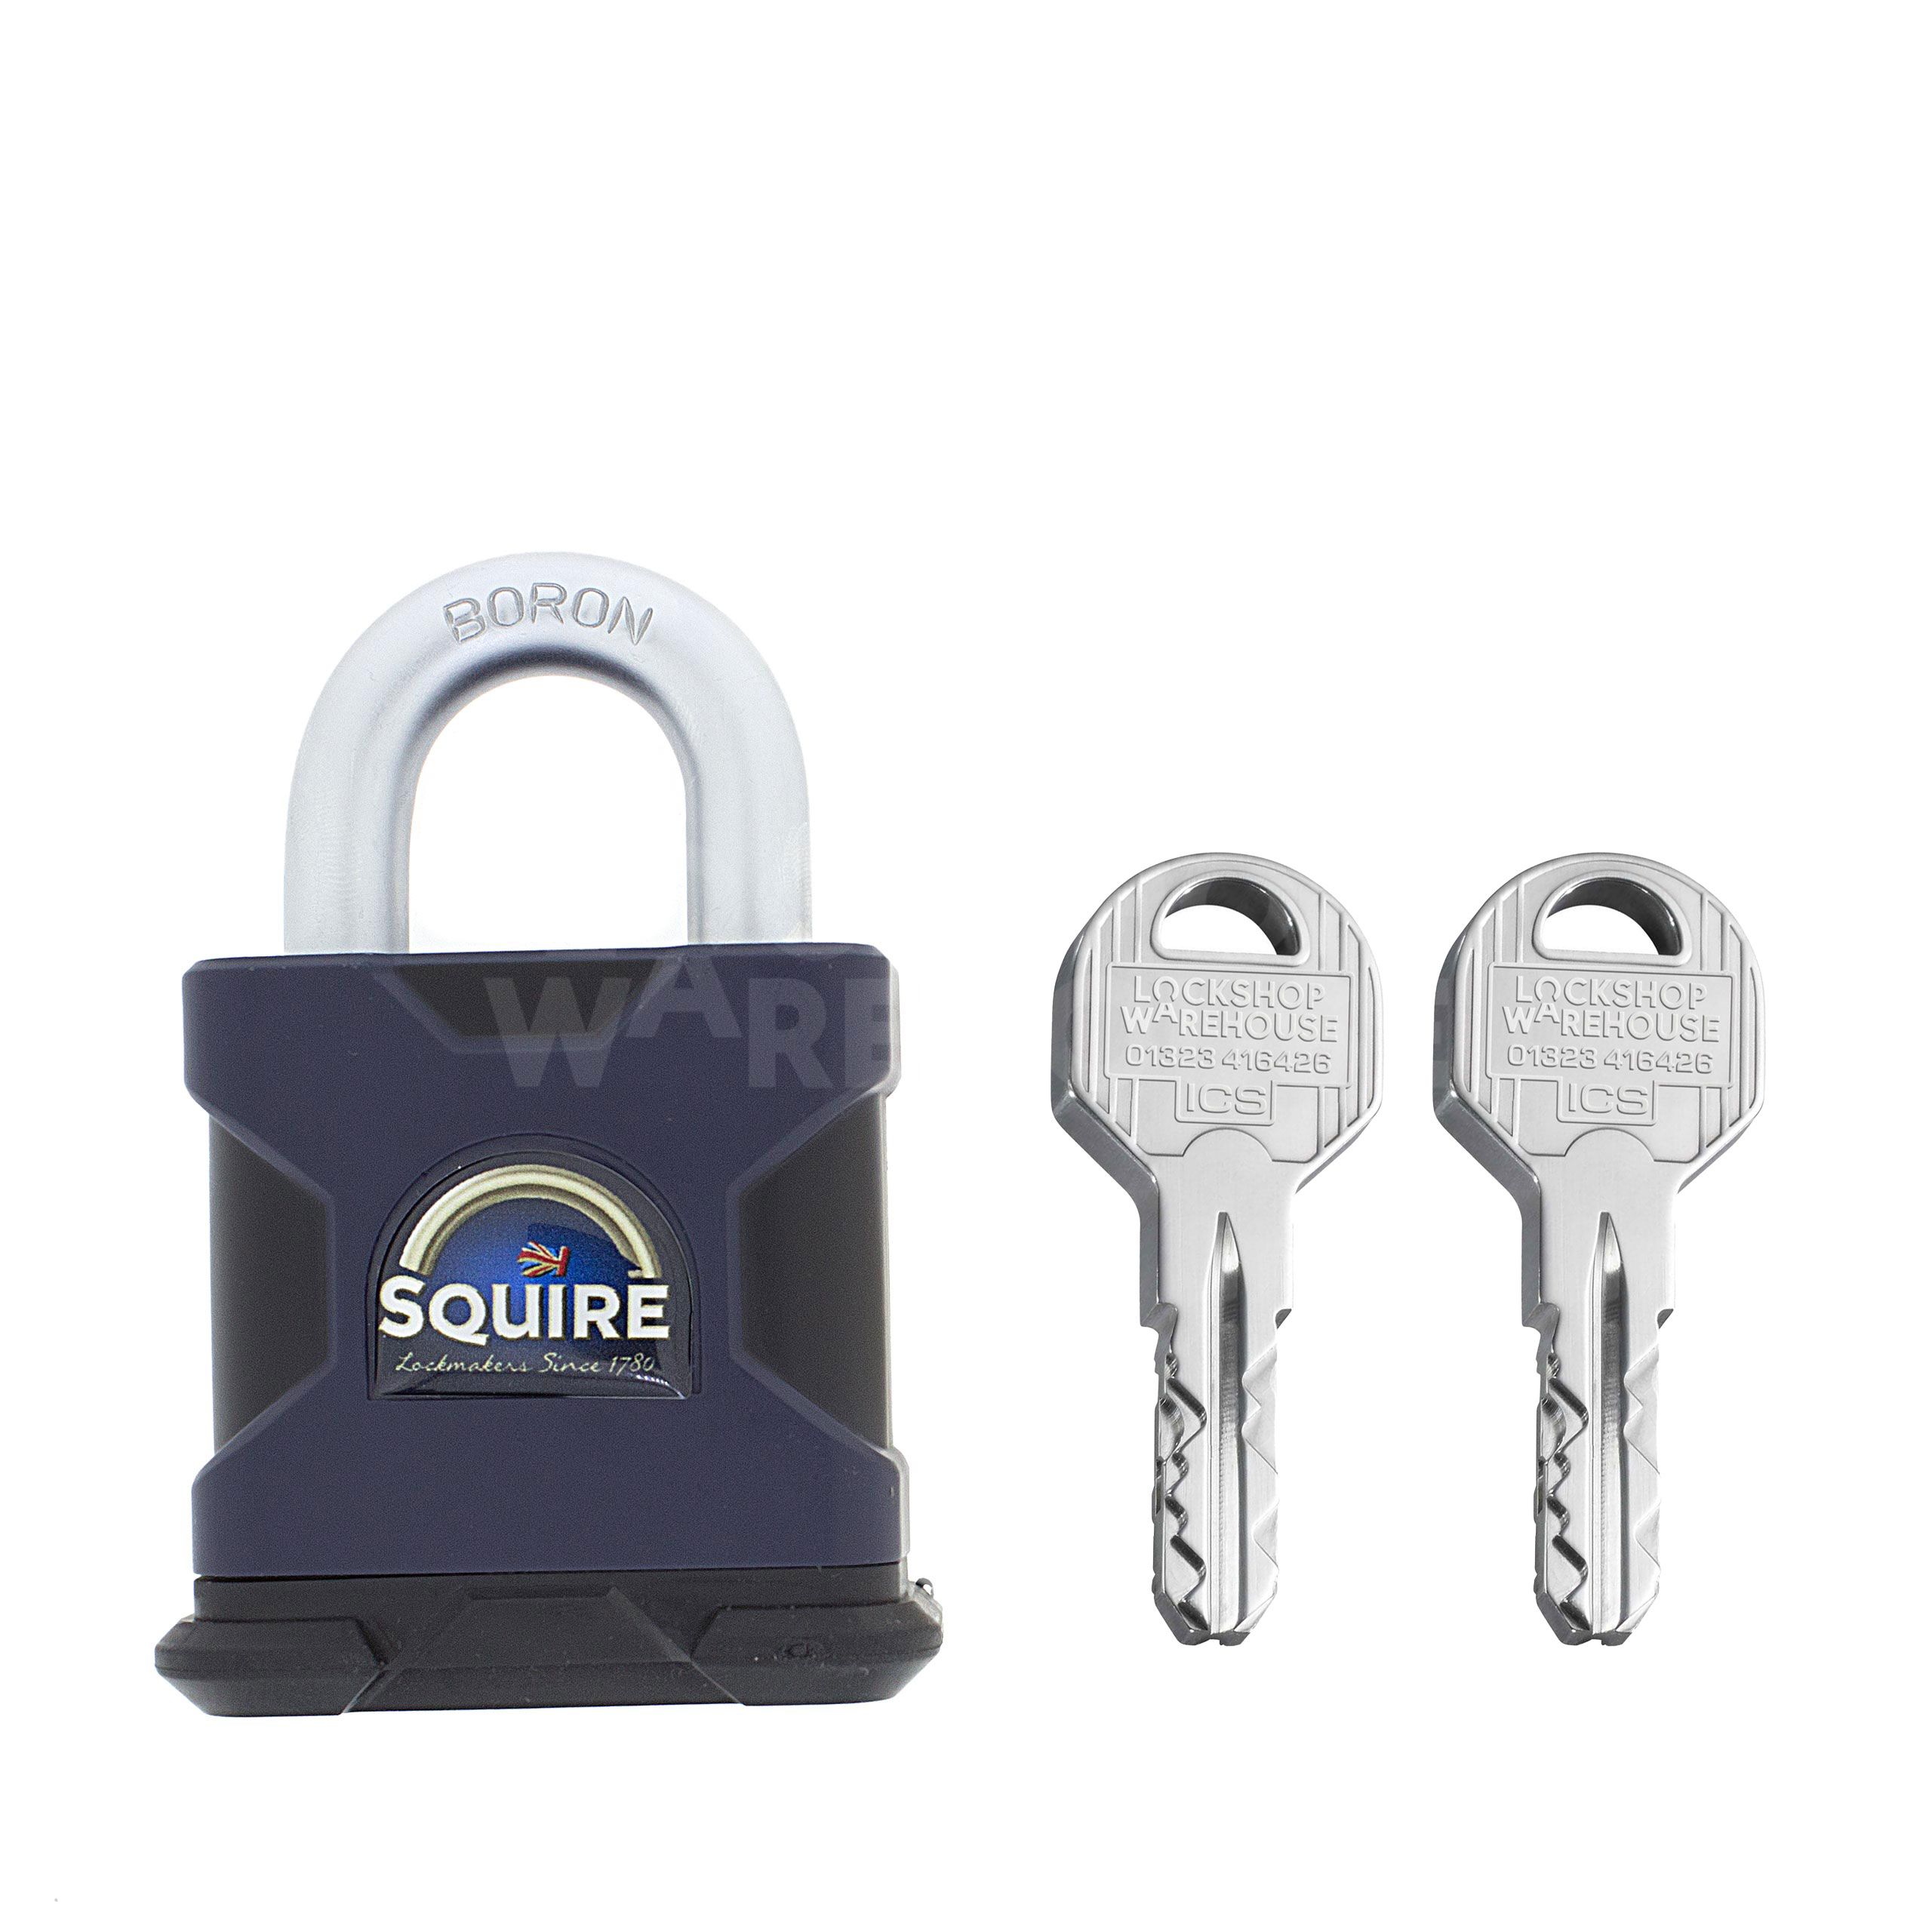 Dimensions Image: SQUIRE Stronghold® SS50S Padlock with EVVA ICS key - Fully Protected key